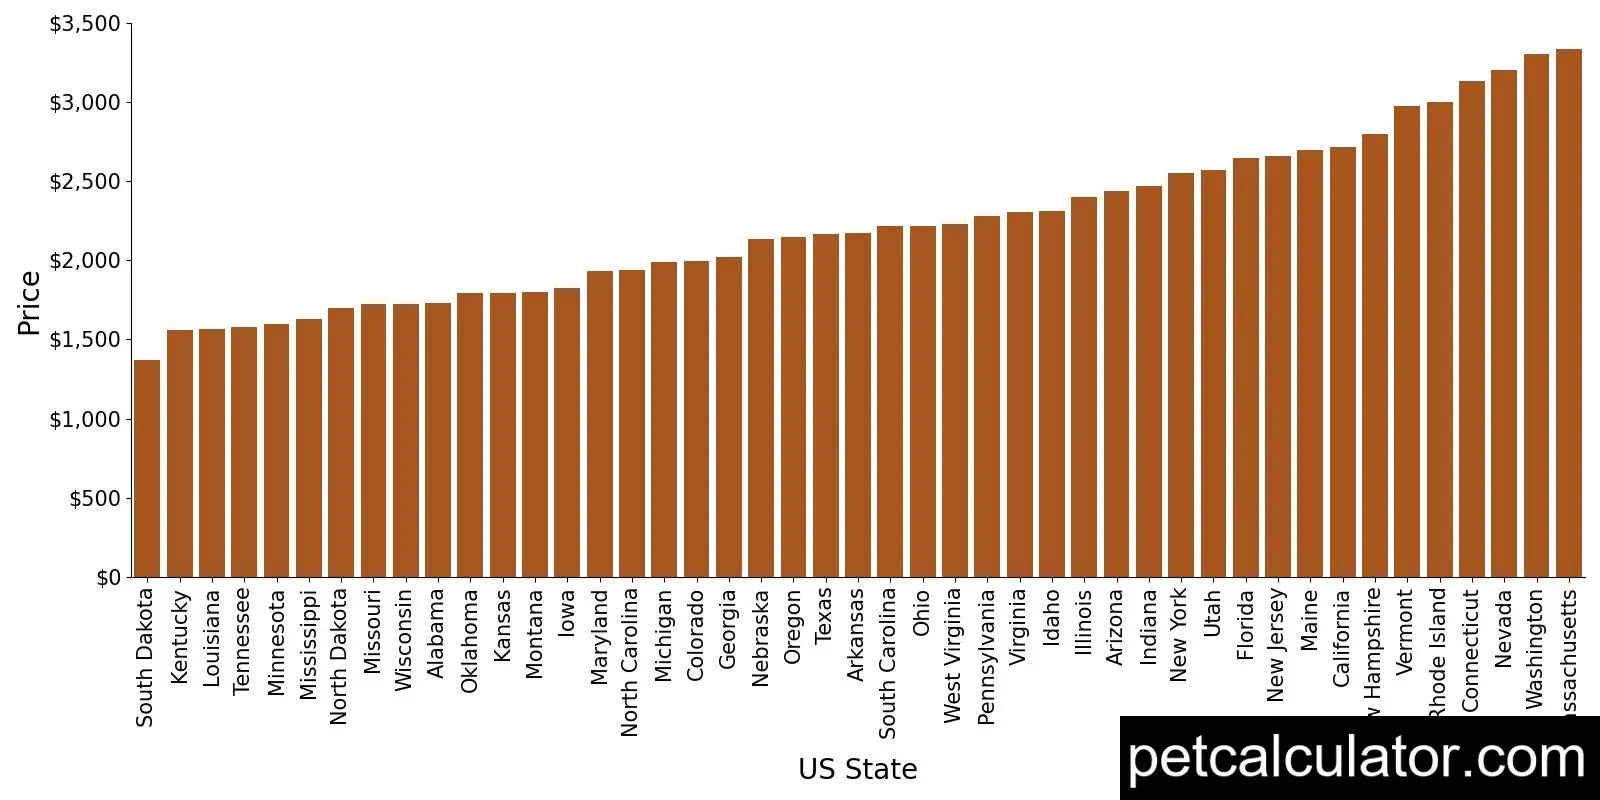 Price of Goldendoodle by US State 